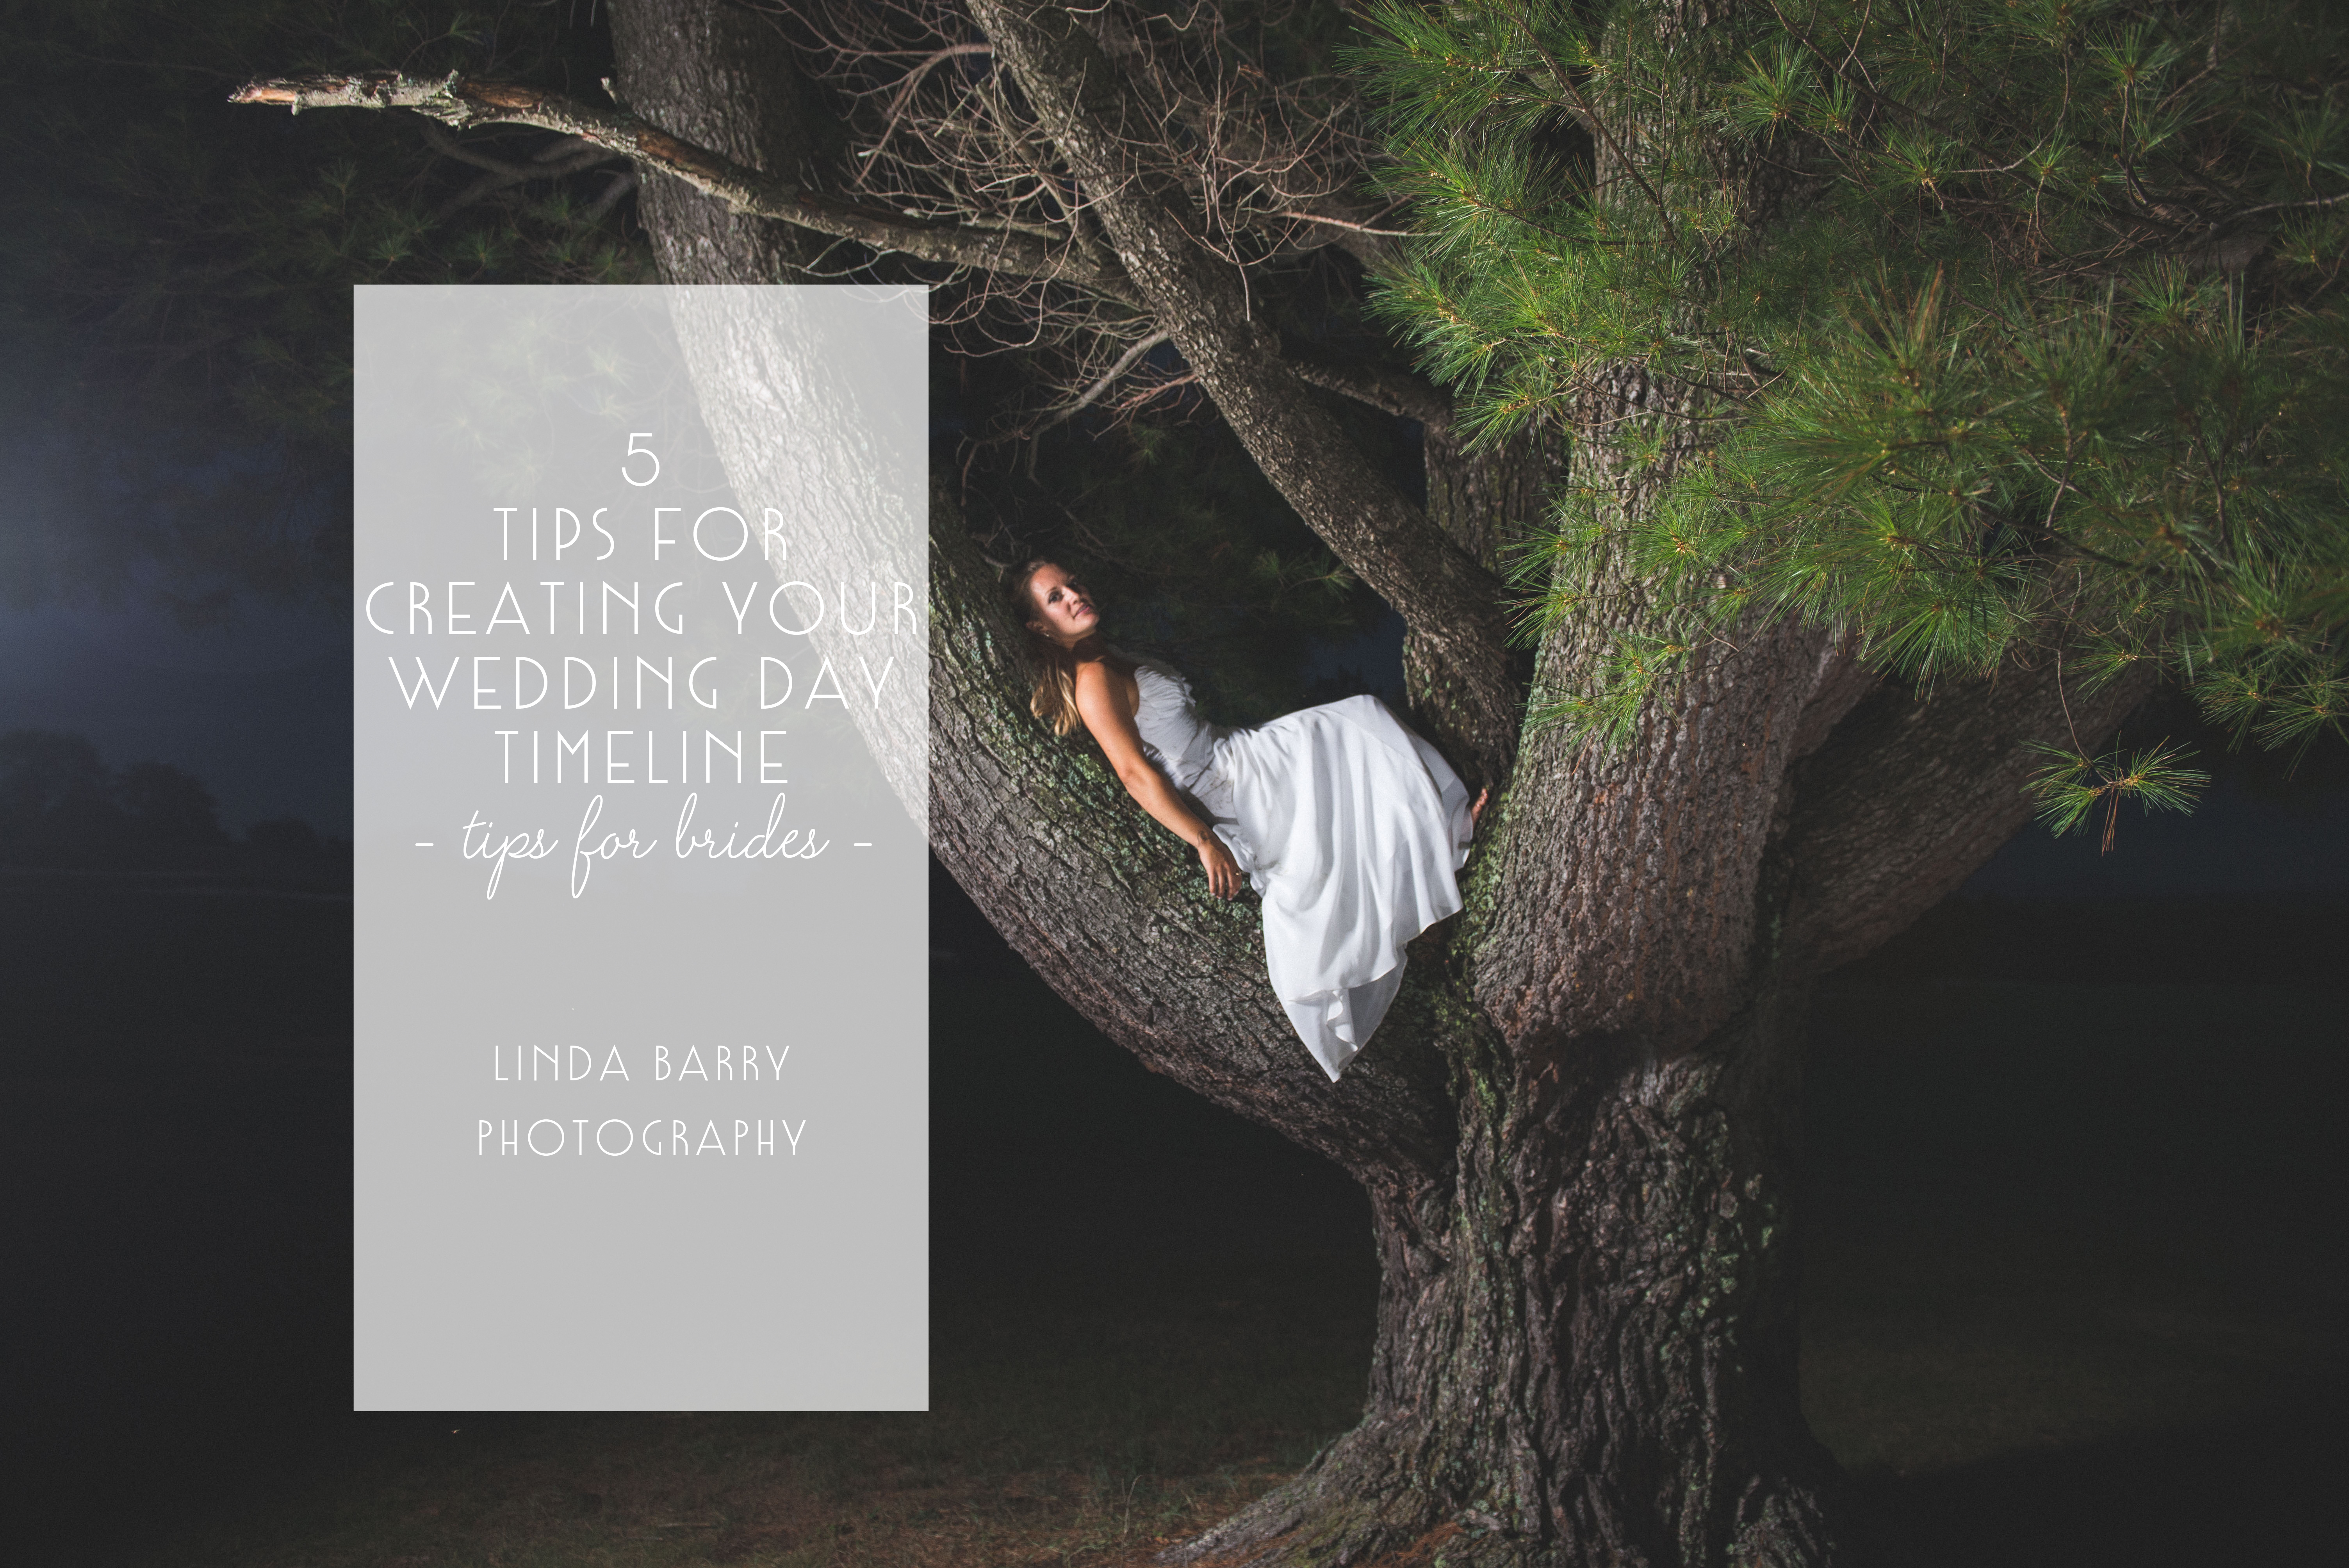 tips for brides to create a wedding day timeline by Linda Barry Photography